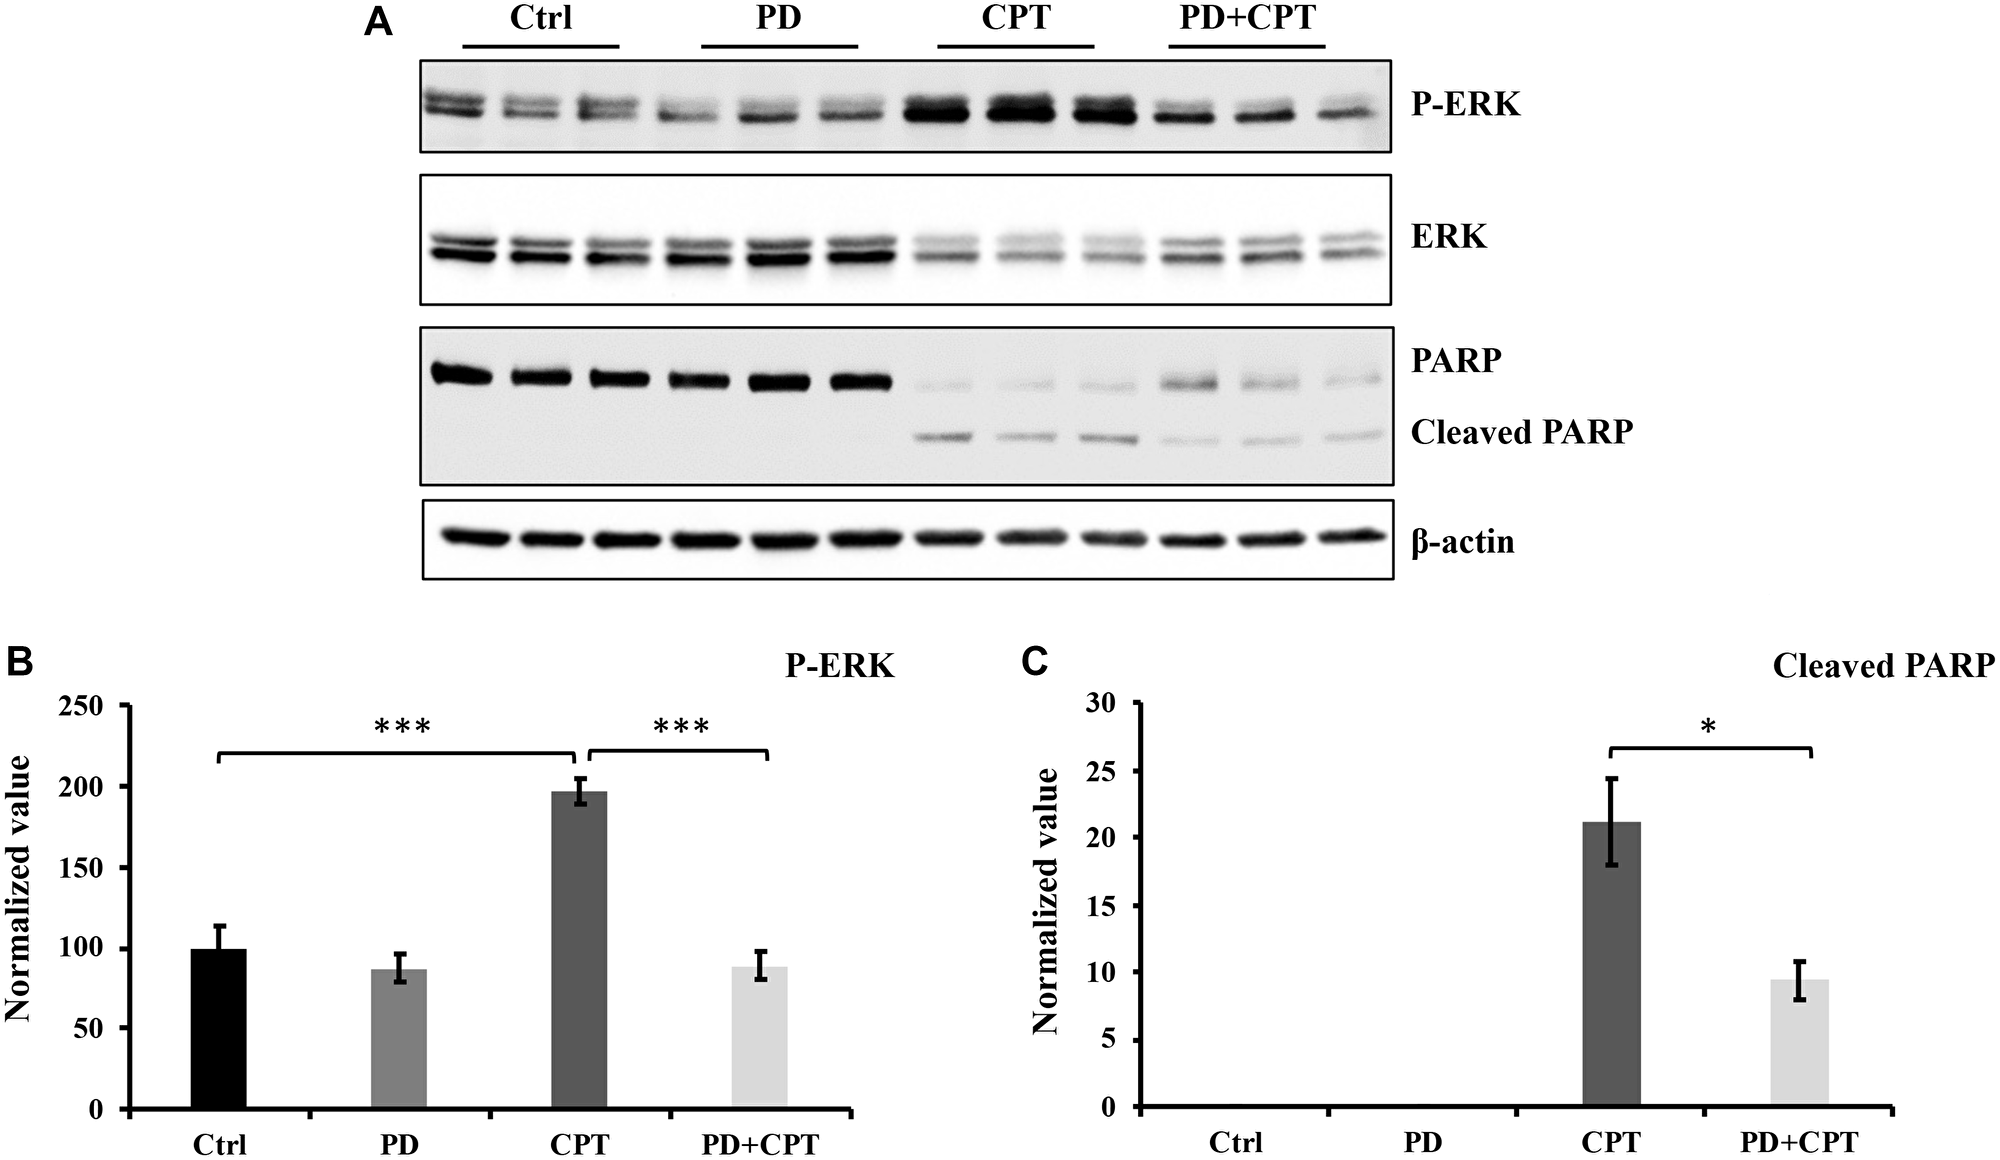 The activation of ERK by CPT has no significant effect on cell apoptosis.